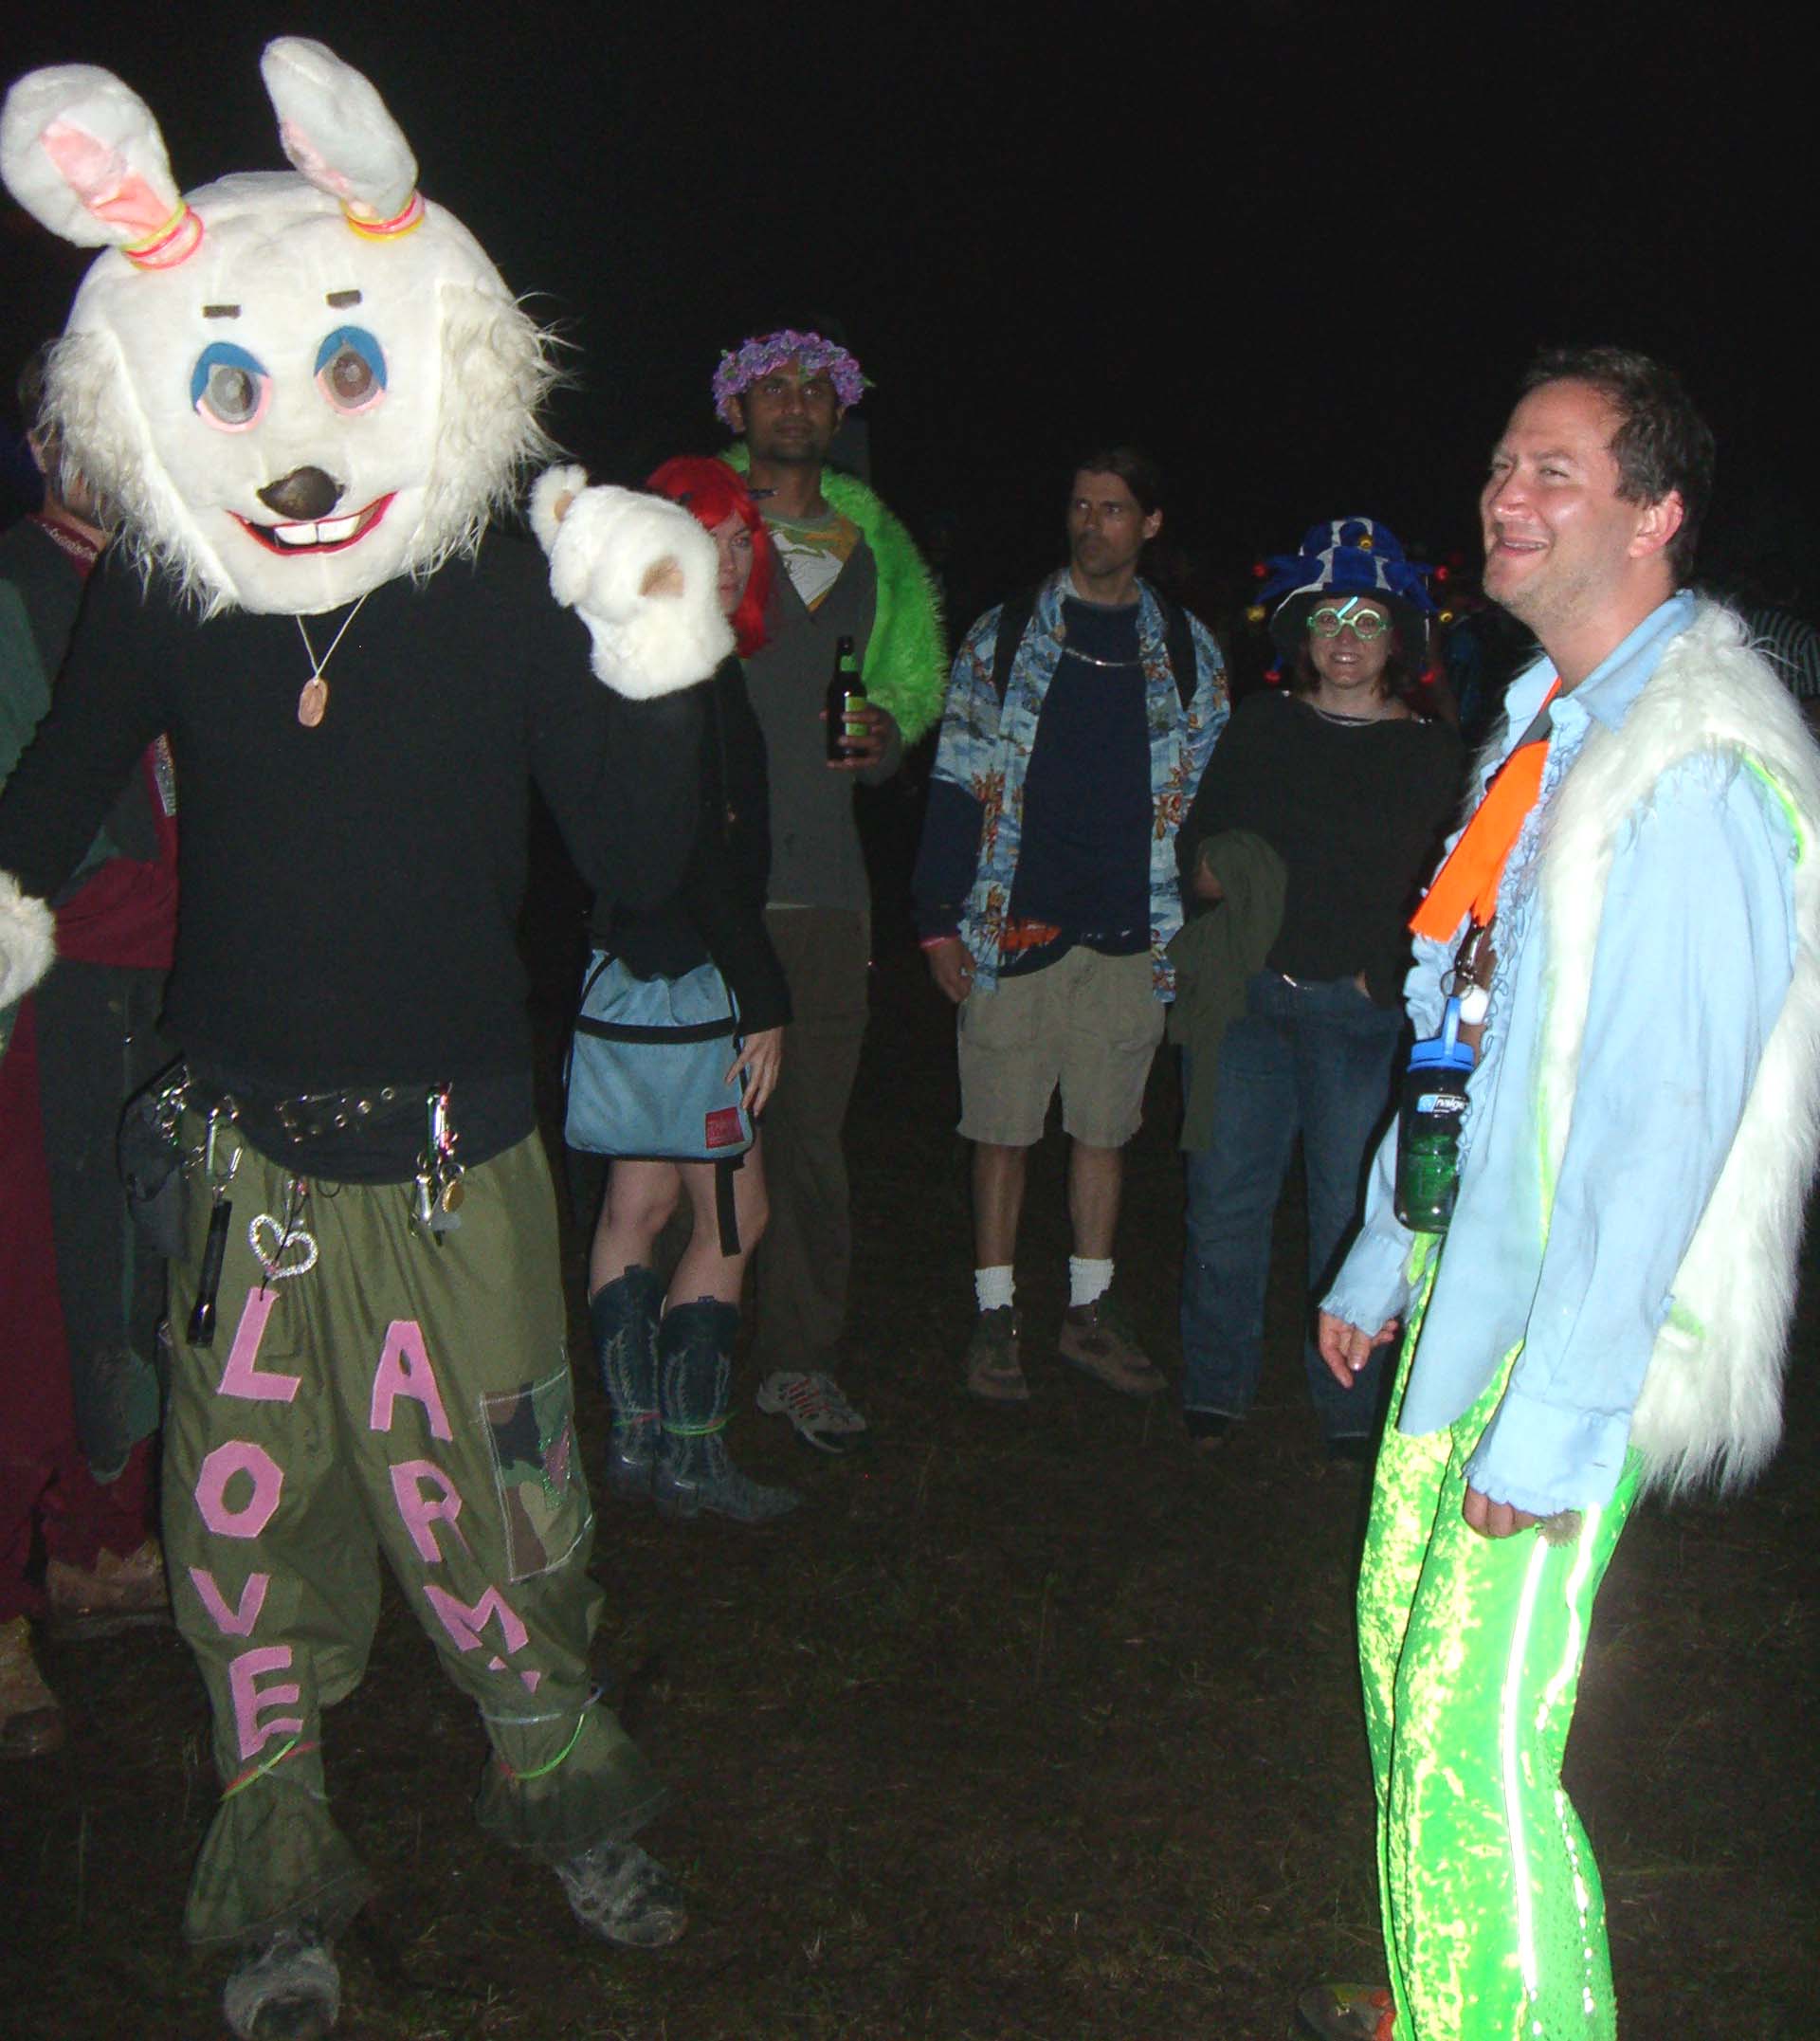 A person in a rabbit costume awaits the burn